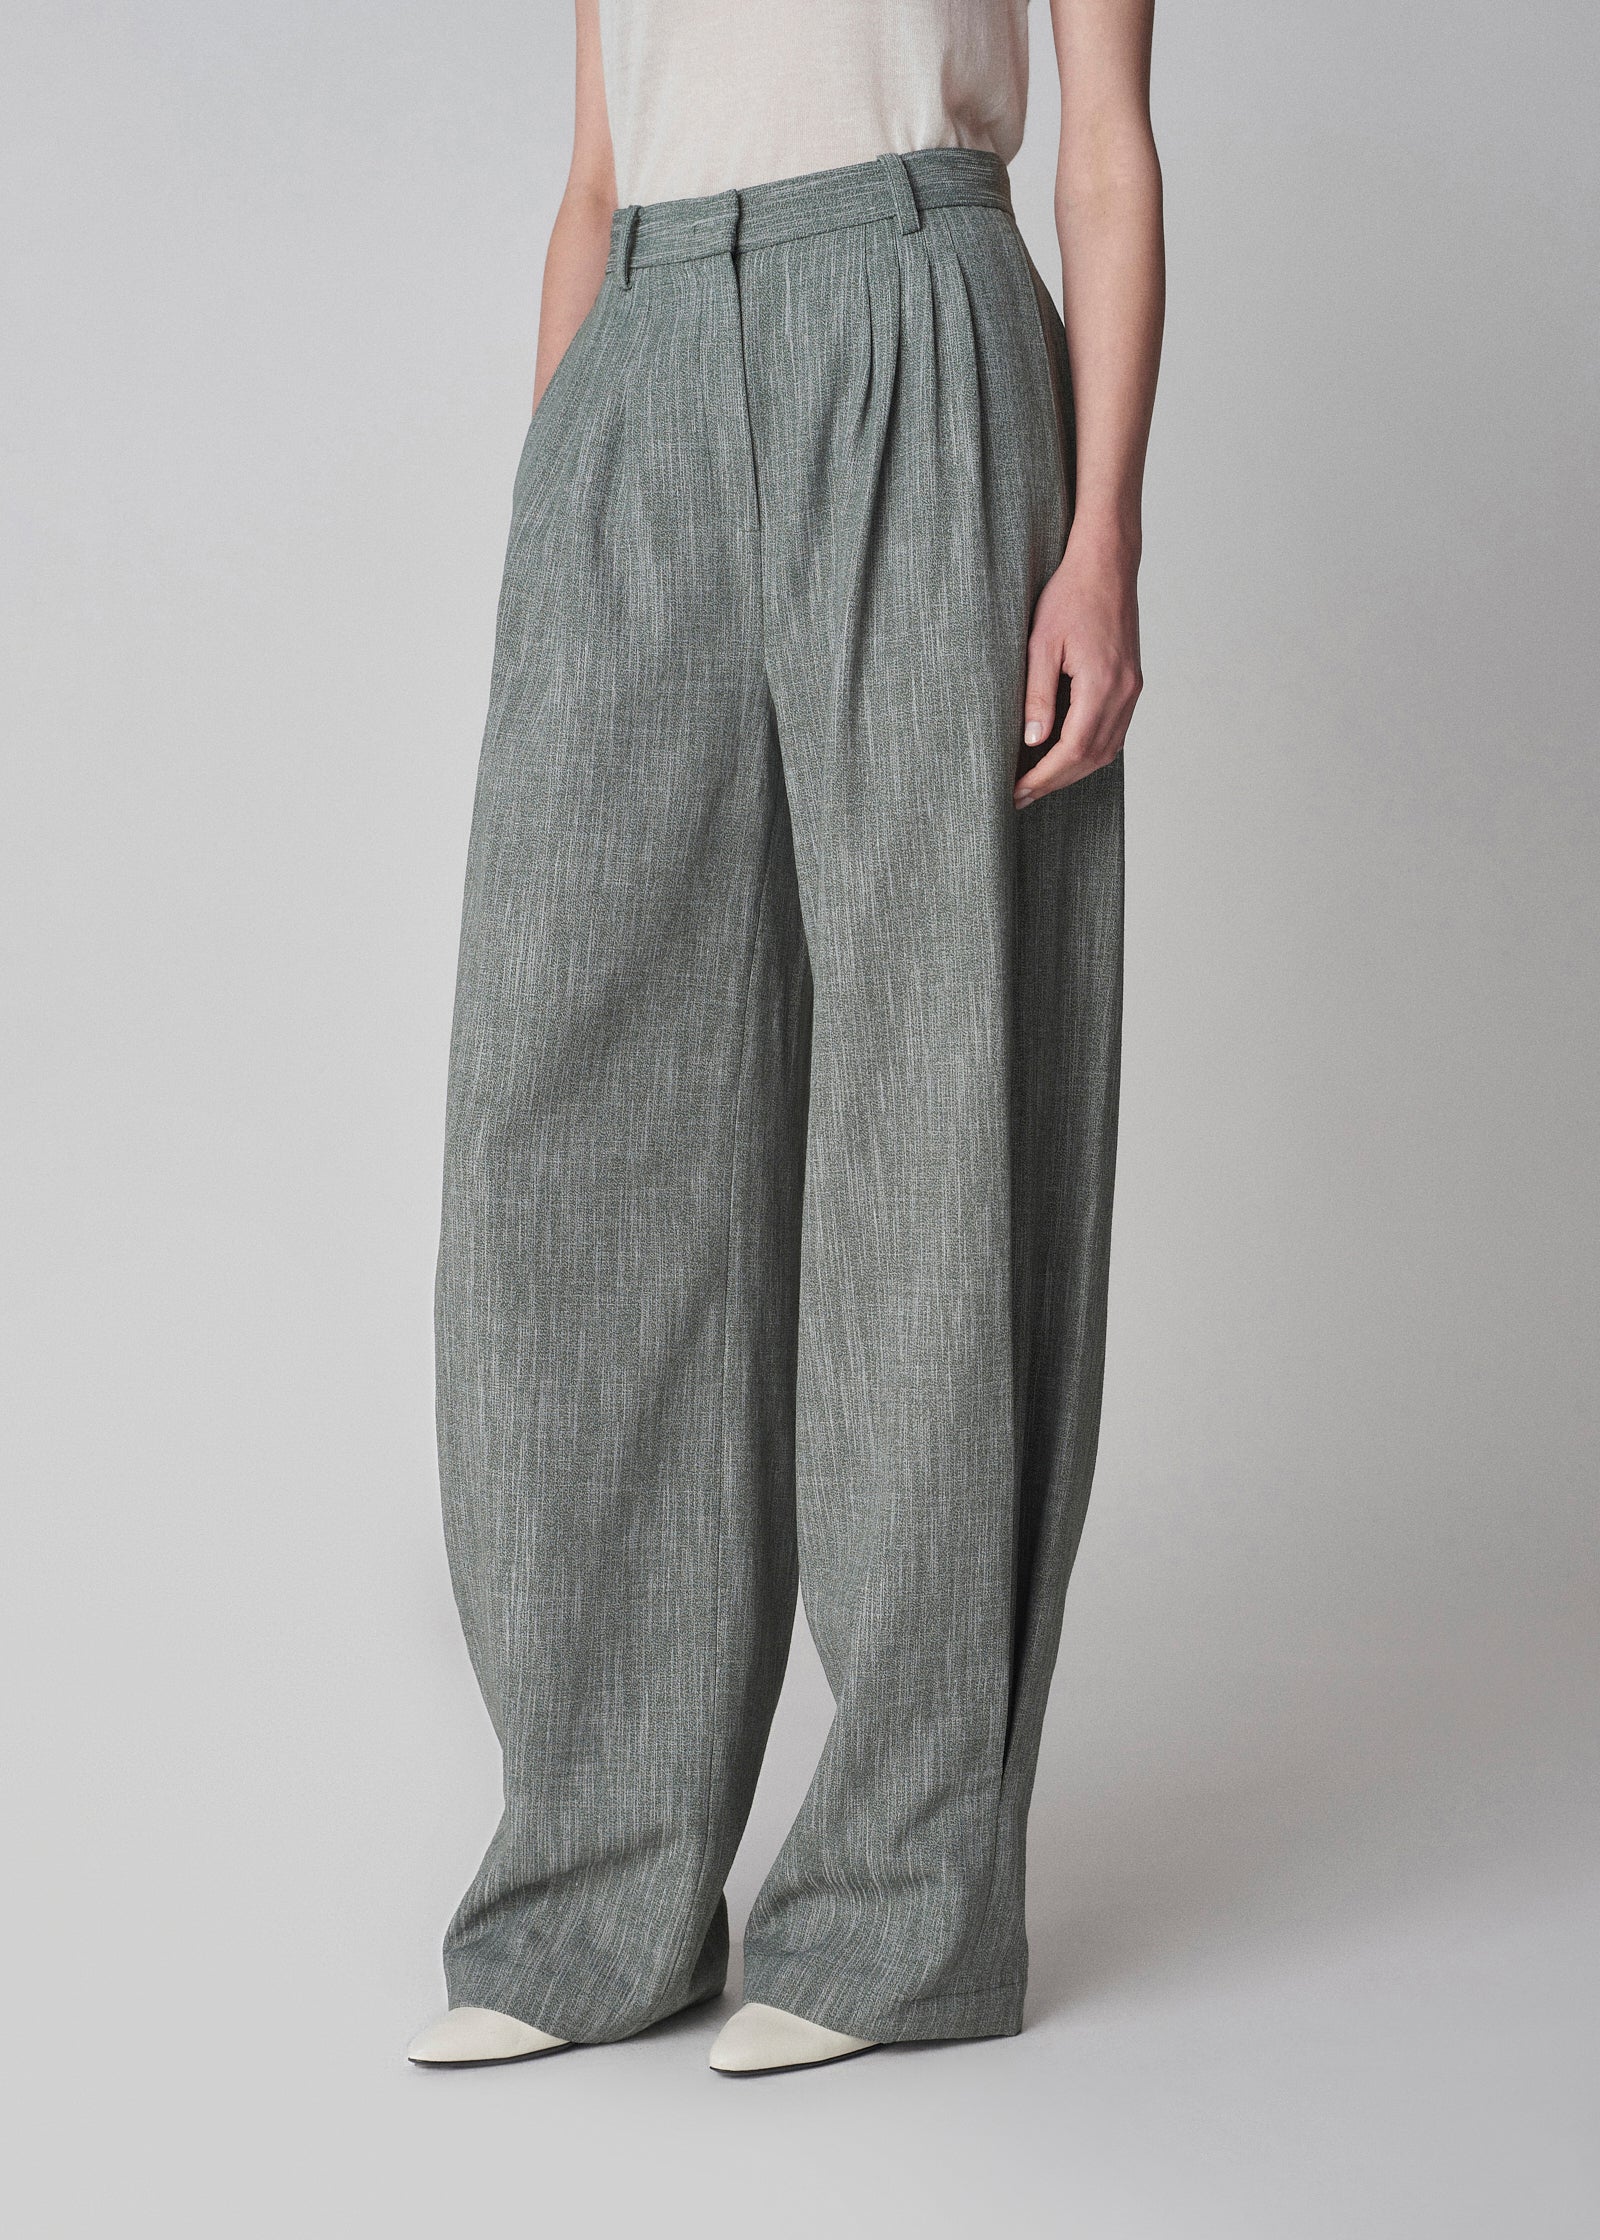 Tailored Aviator Pant in Melange Suiting - Dark Forest - CO Collections